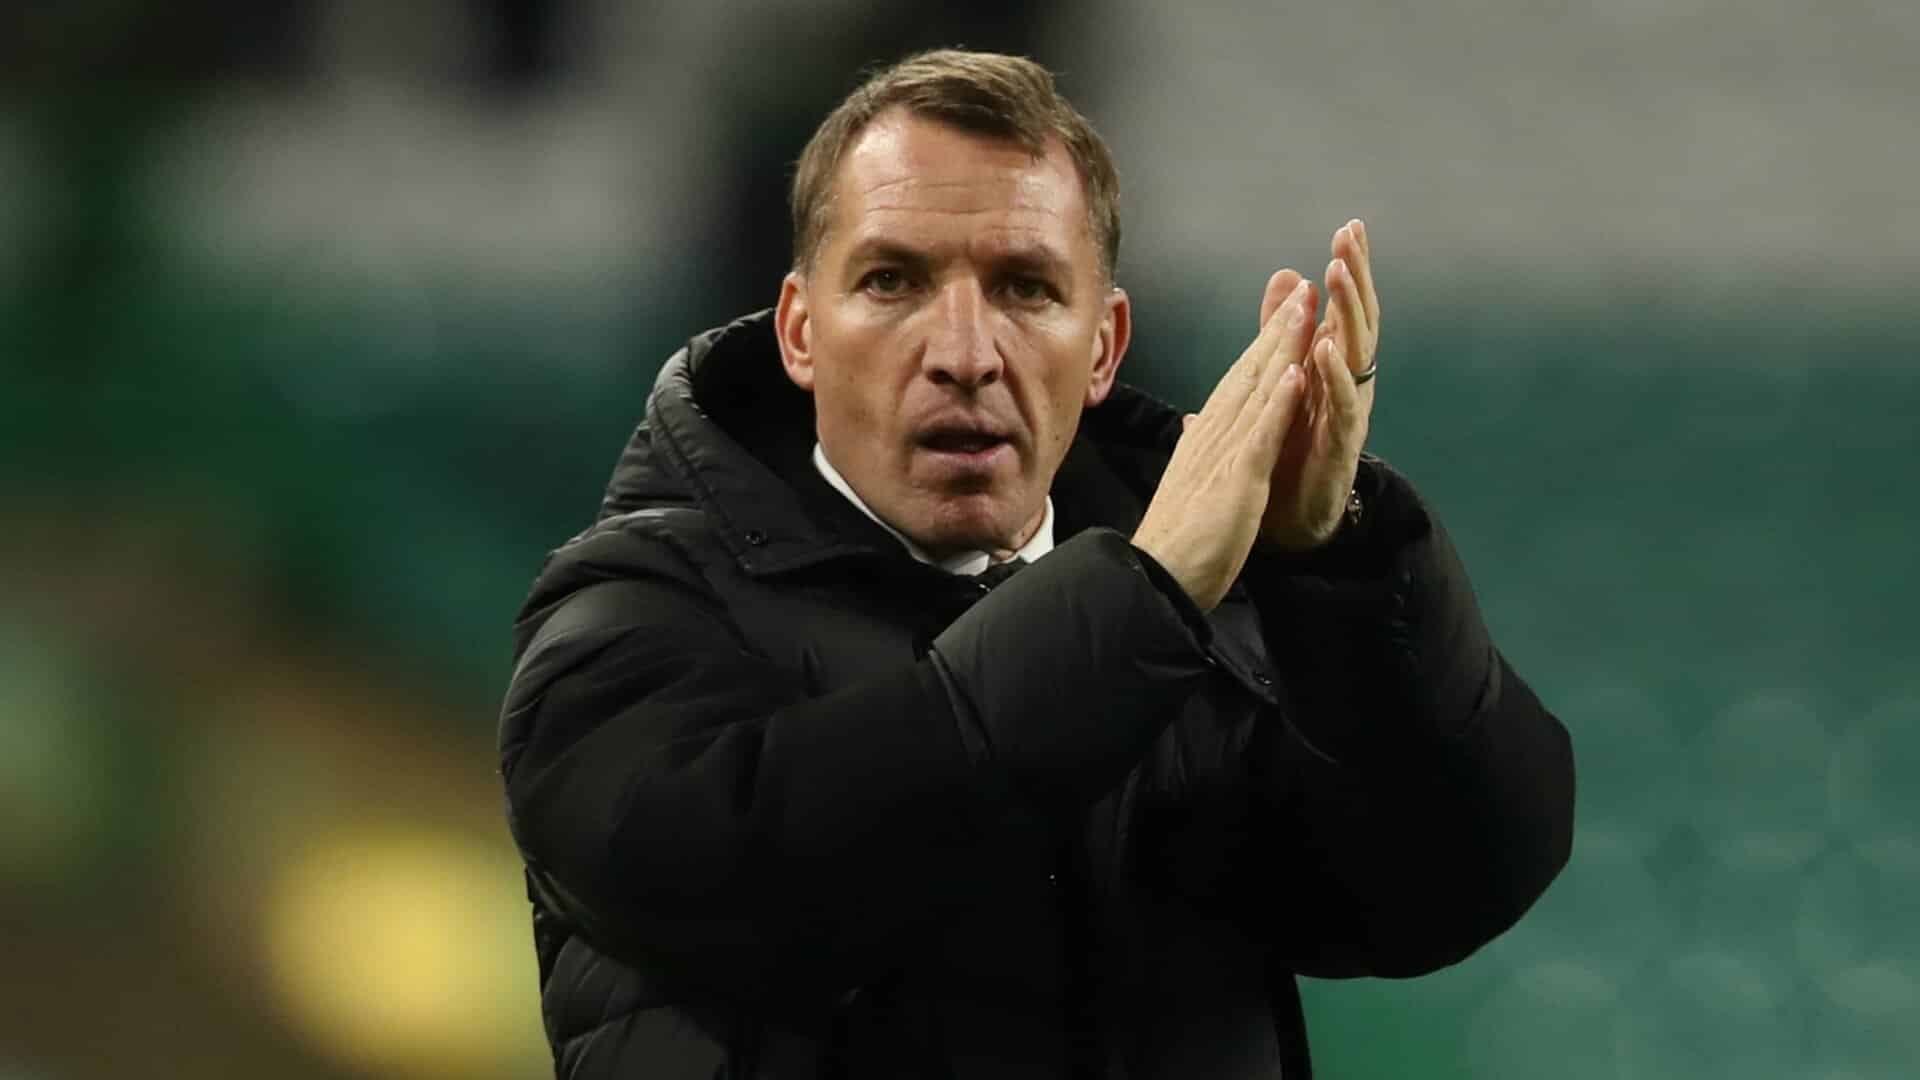 Brendan Rodgers Doesn’t Want To Stockpile Players1920 x 1080